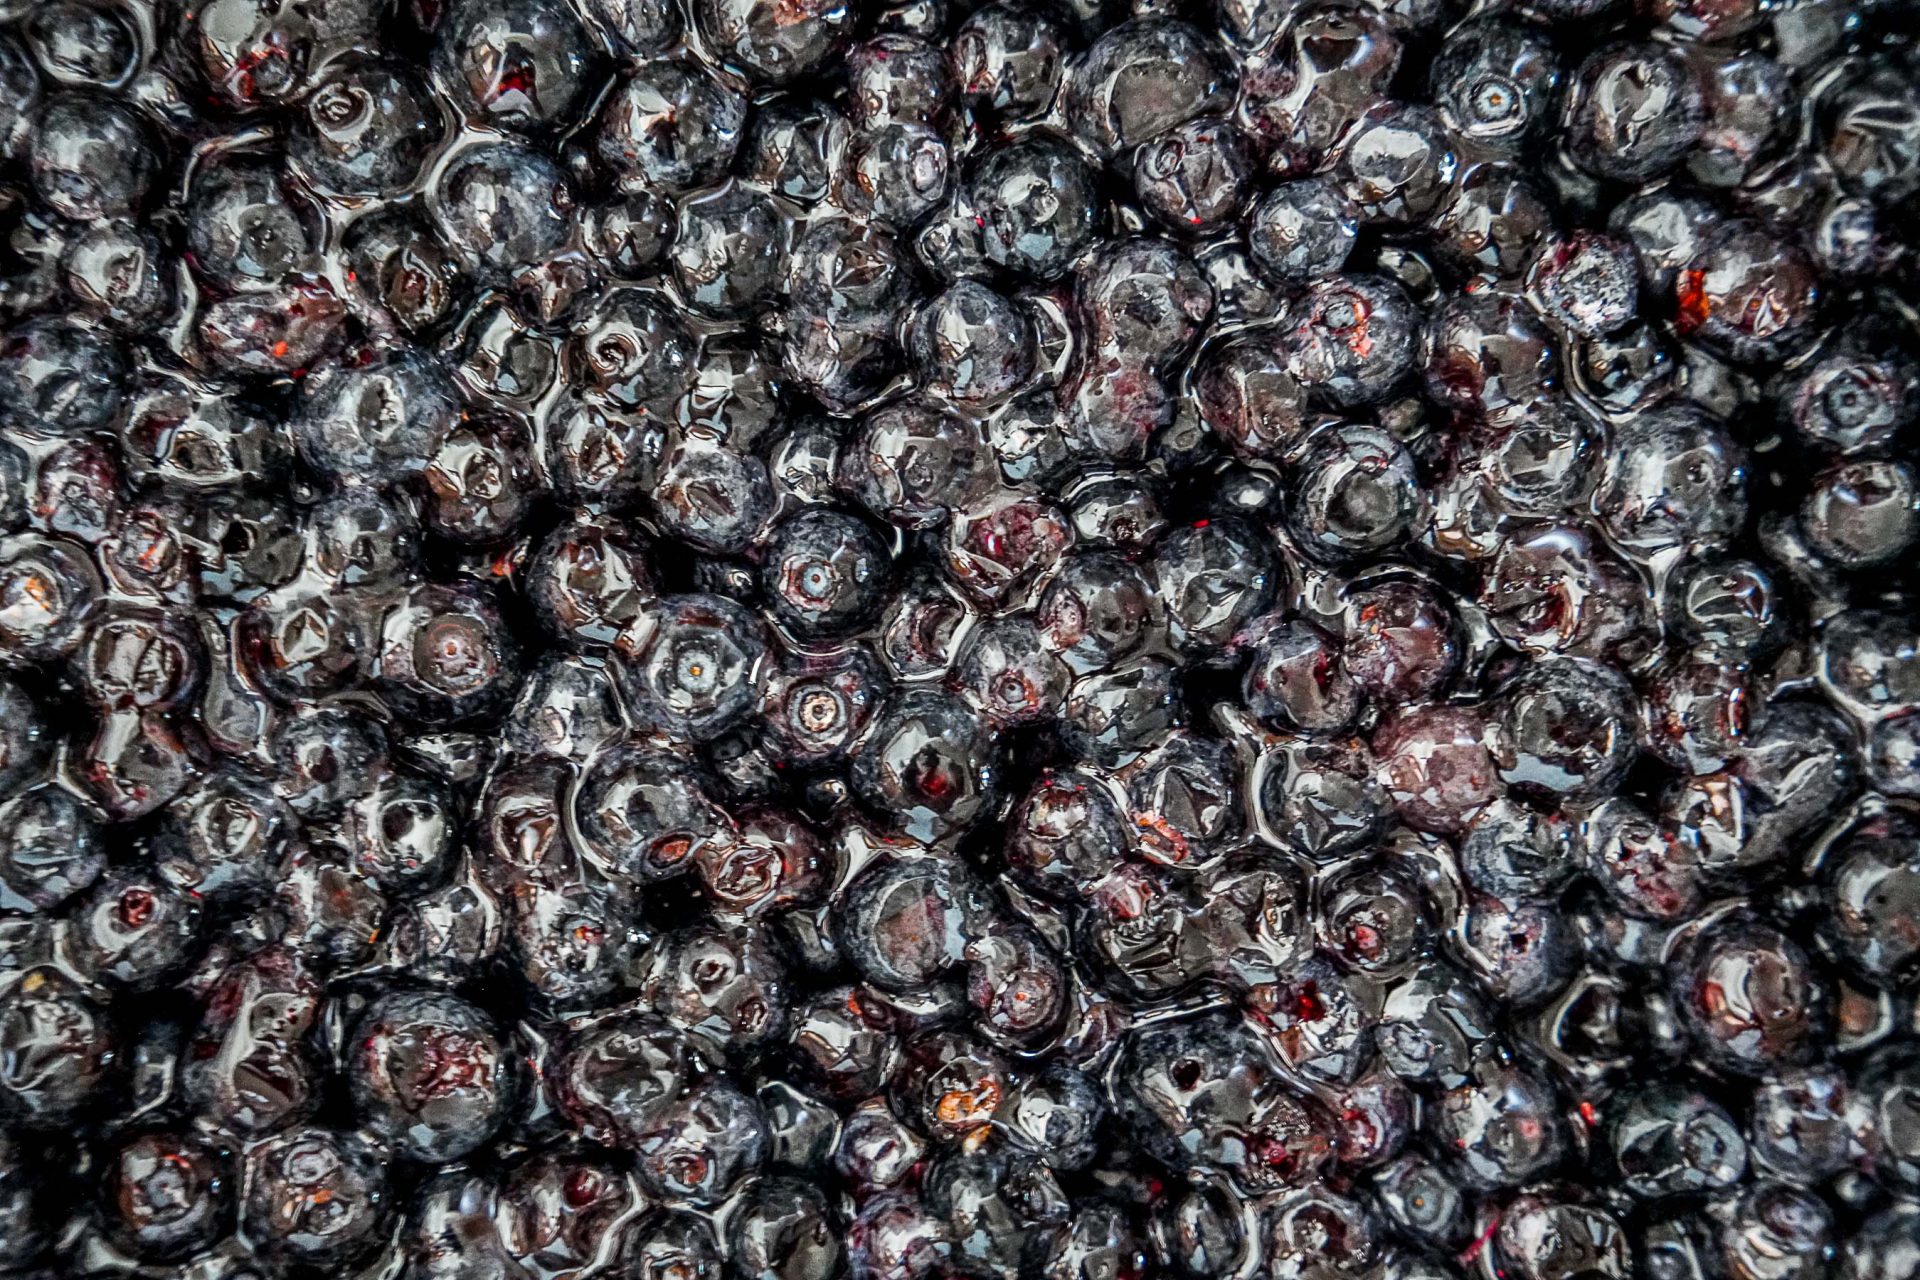 Blueberries from Combloux